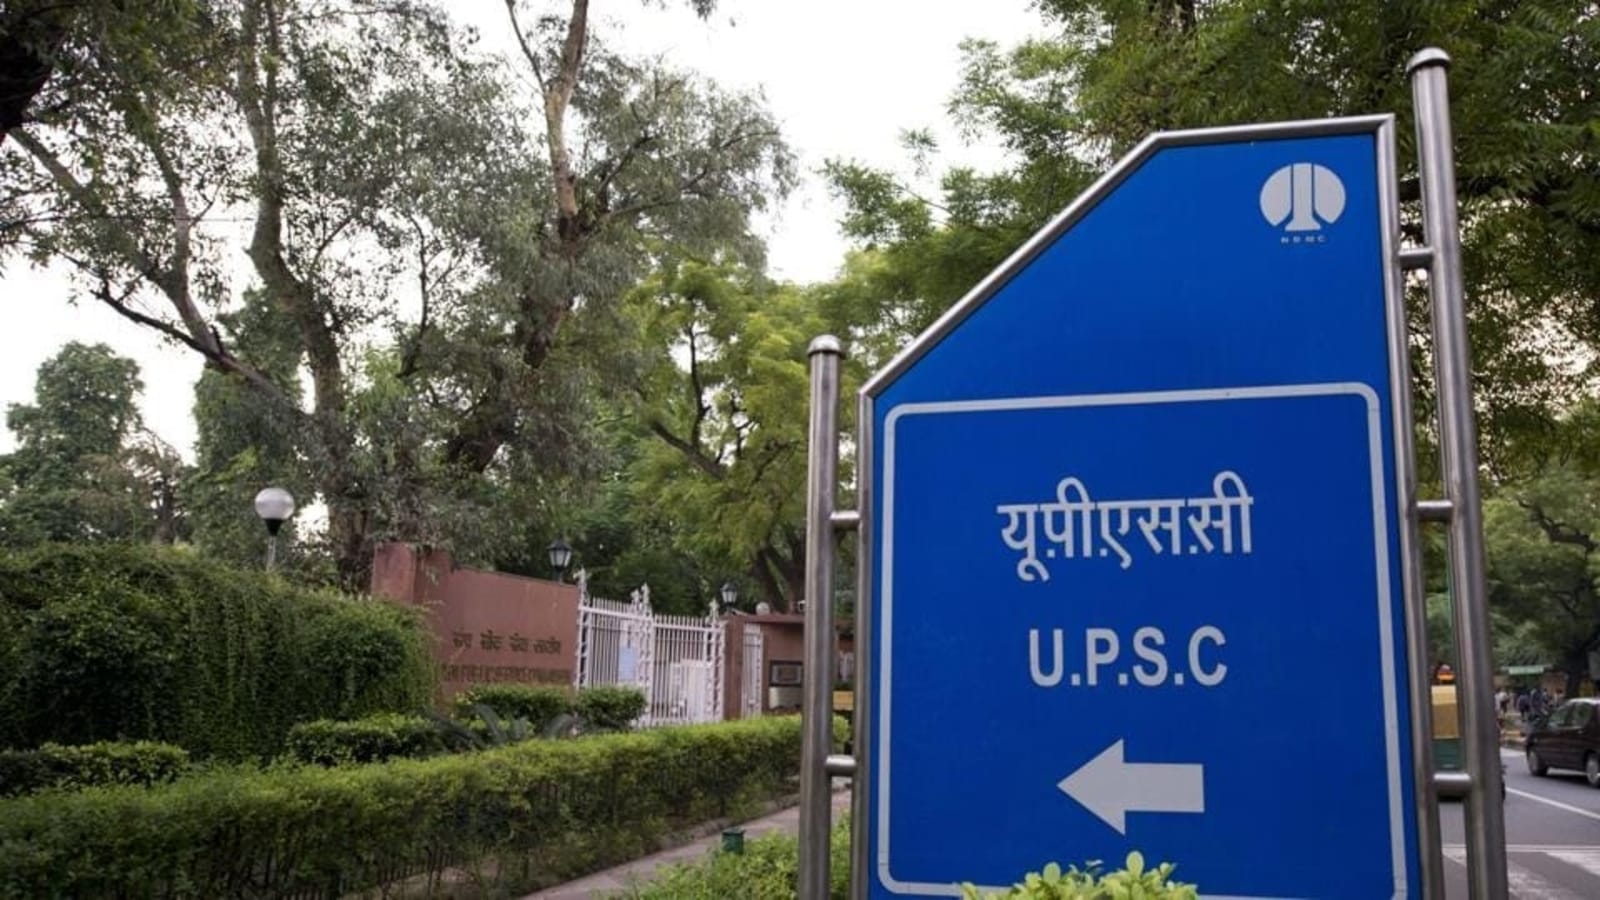 UPSC Prelims 2021: Strategy to prepare for the exam